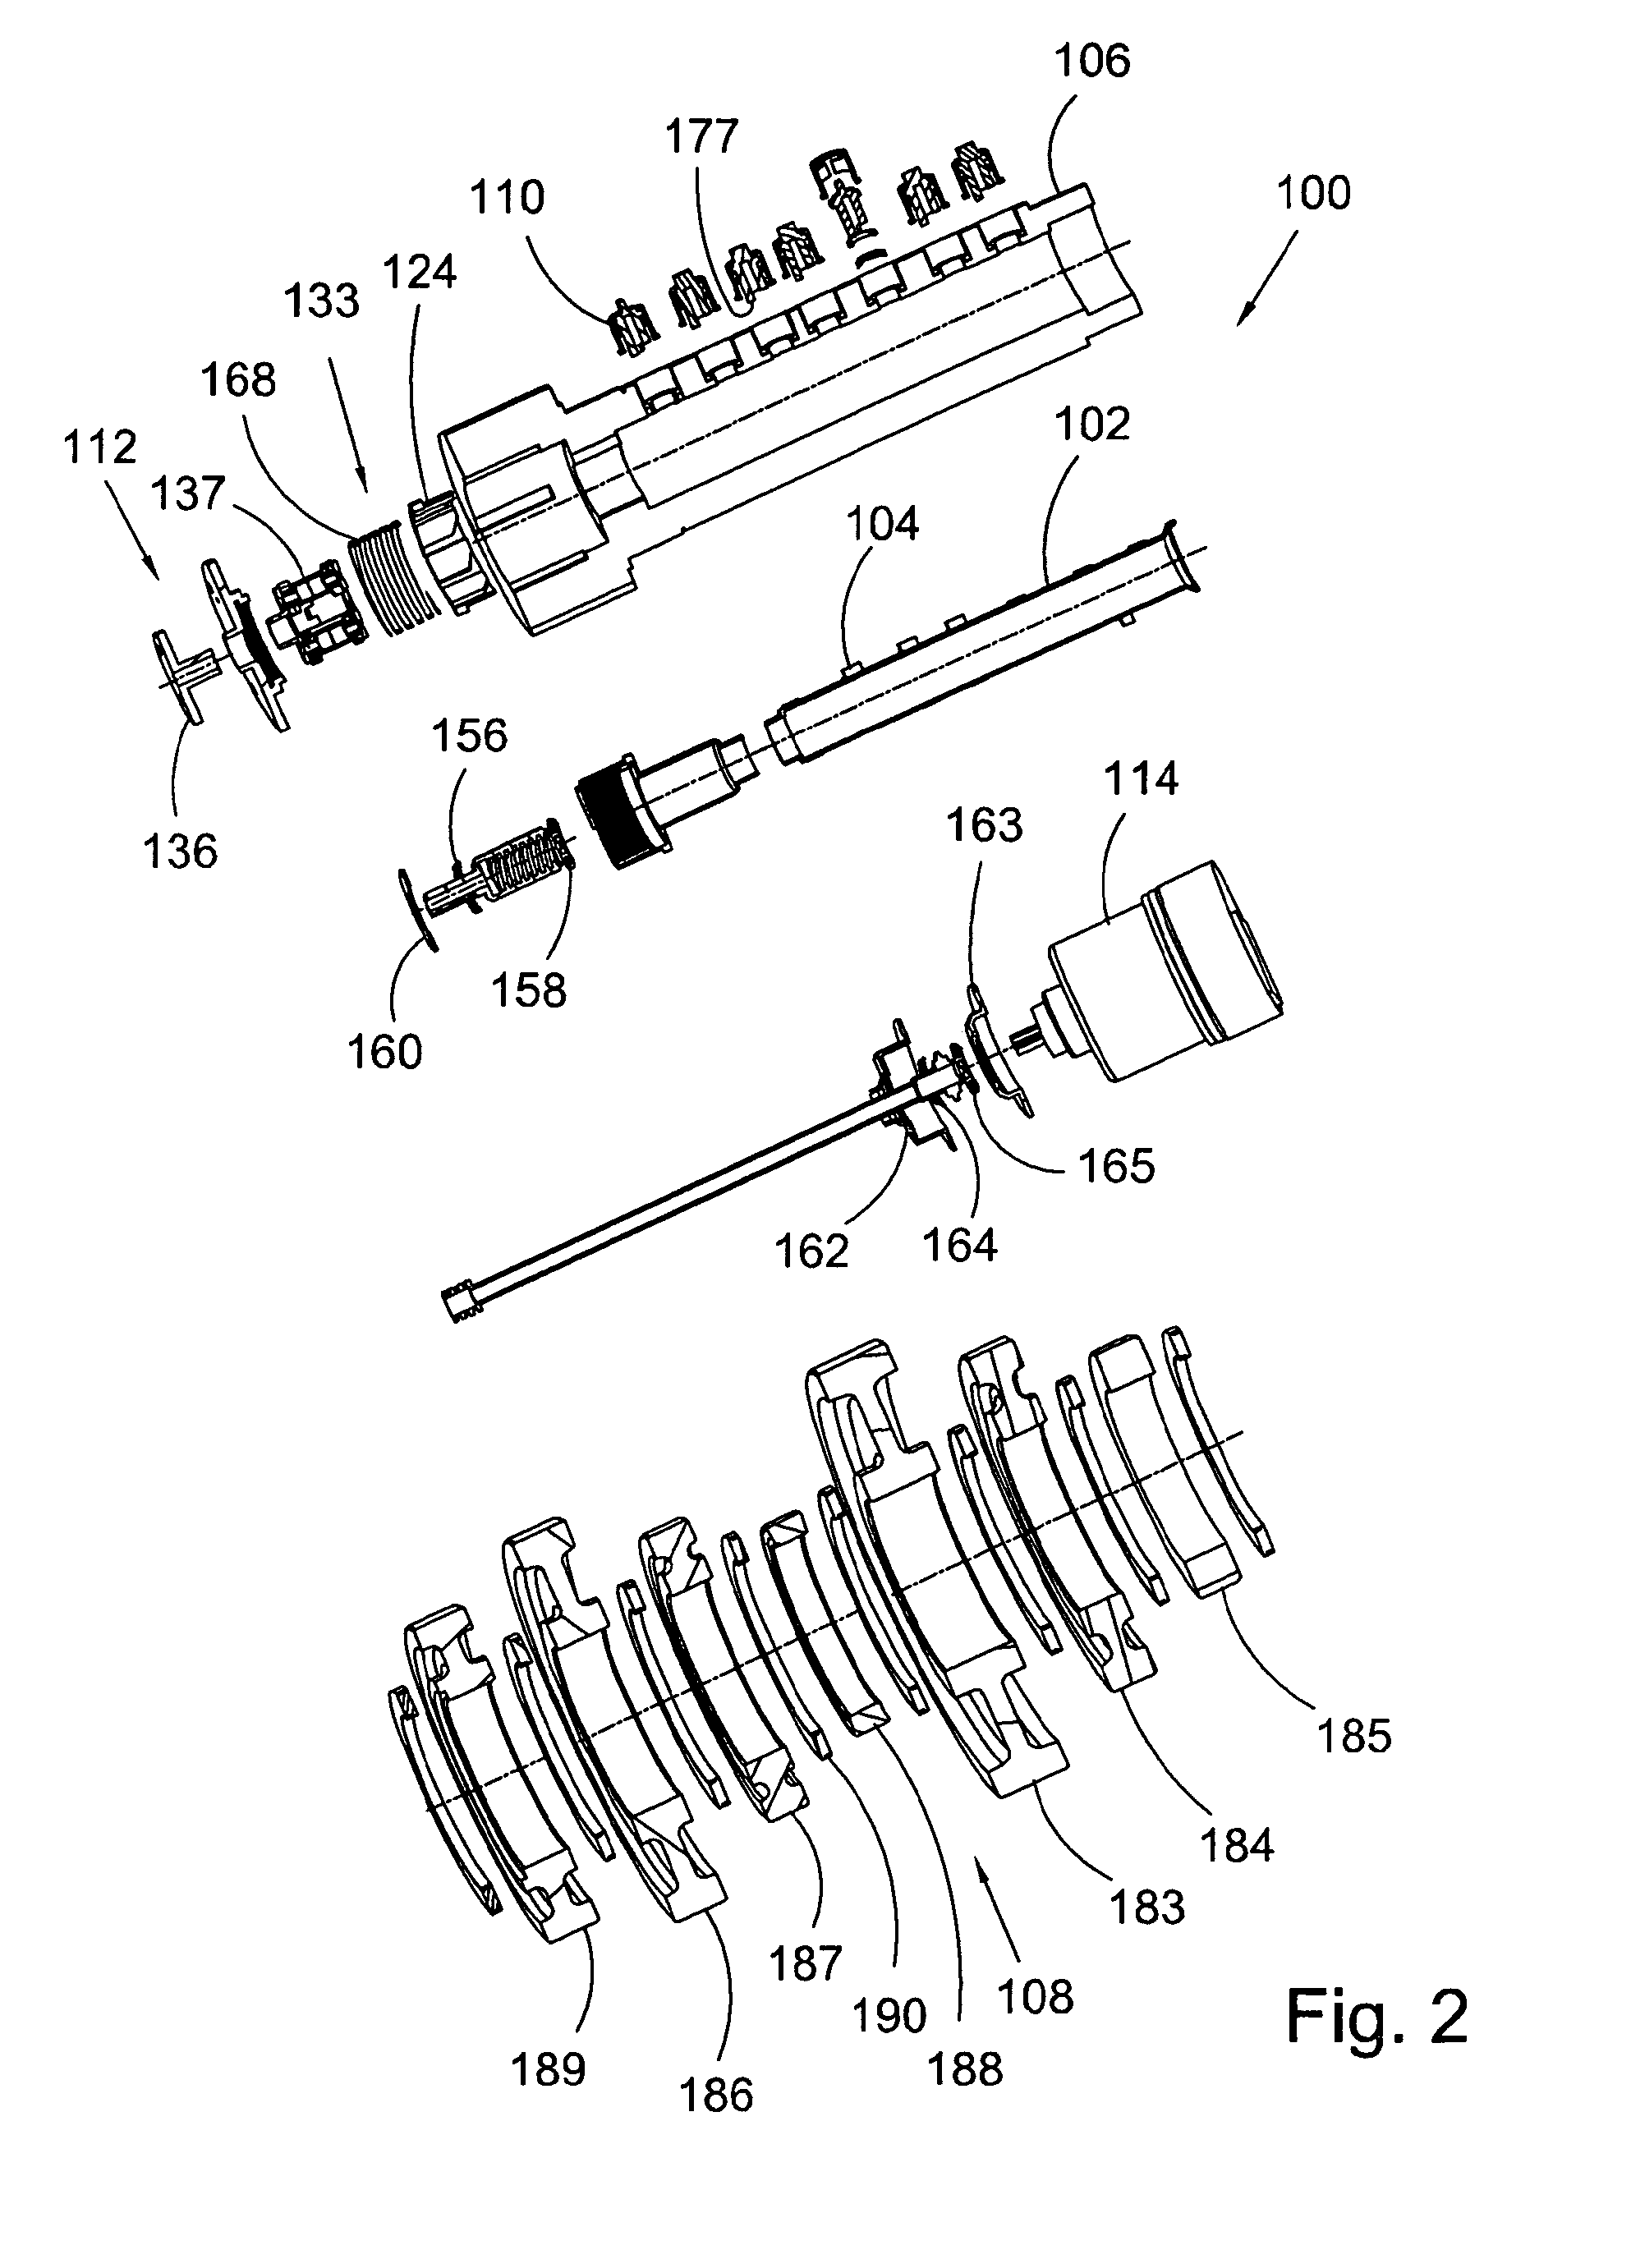 Gear selection assembly with nested differentially rotatable tube